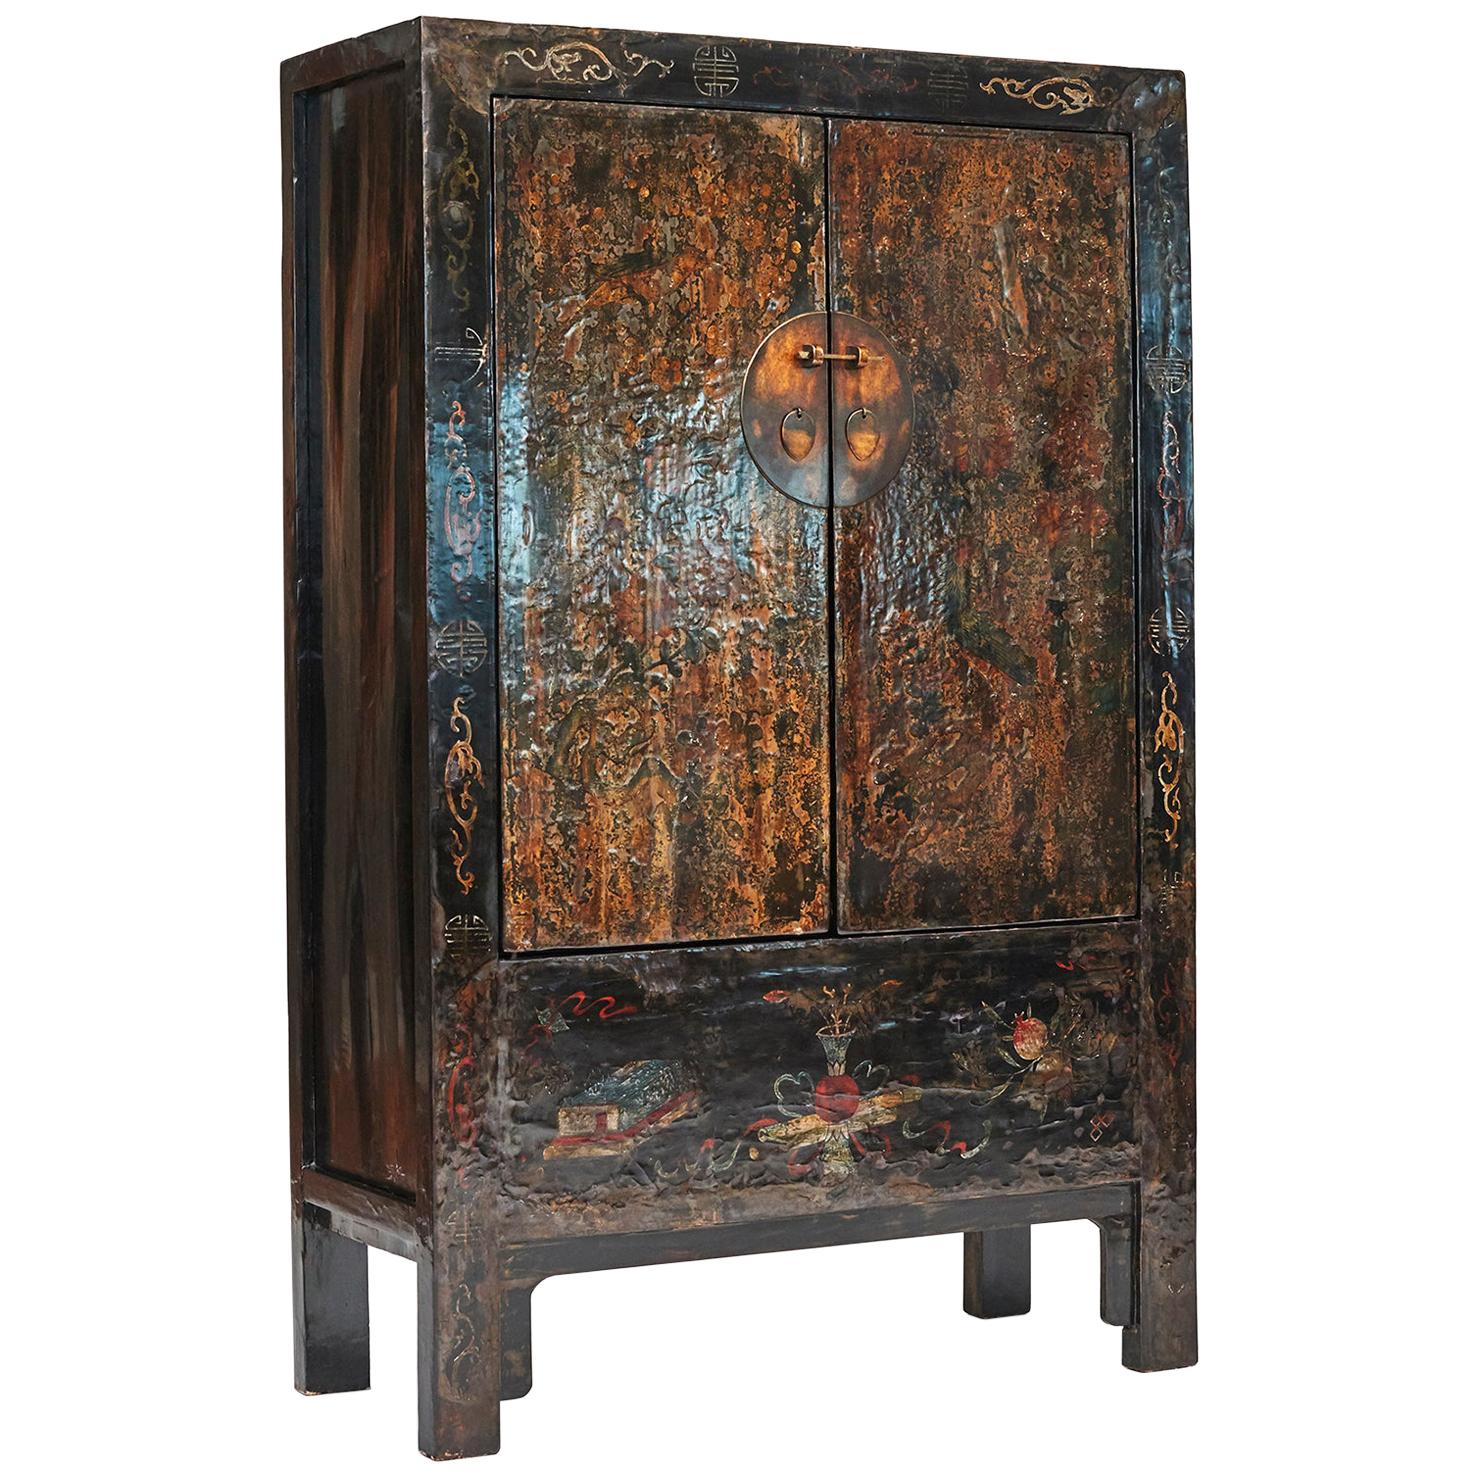 19th Century Original Decorated lacquer cabinet from "Shanxi", China